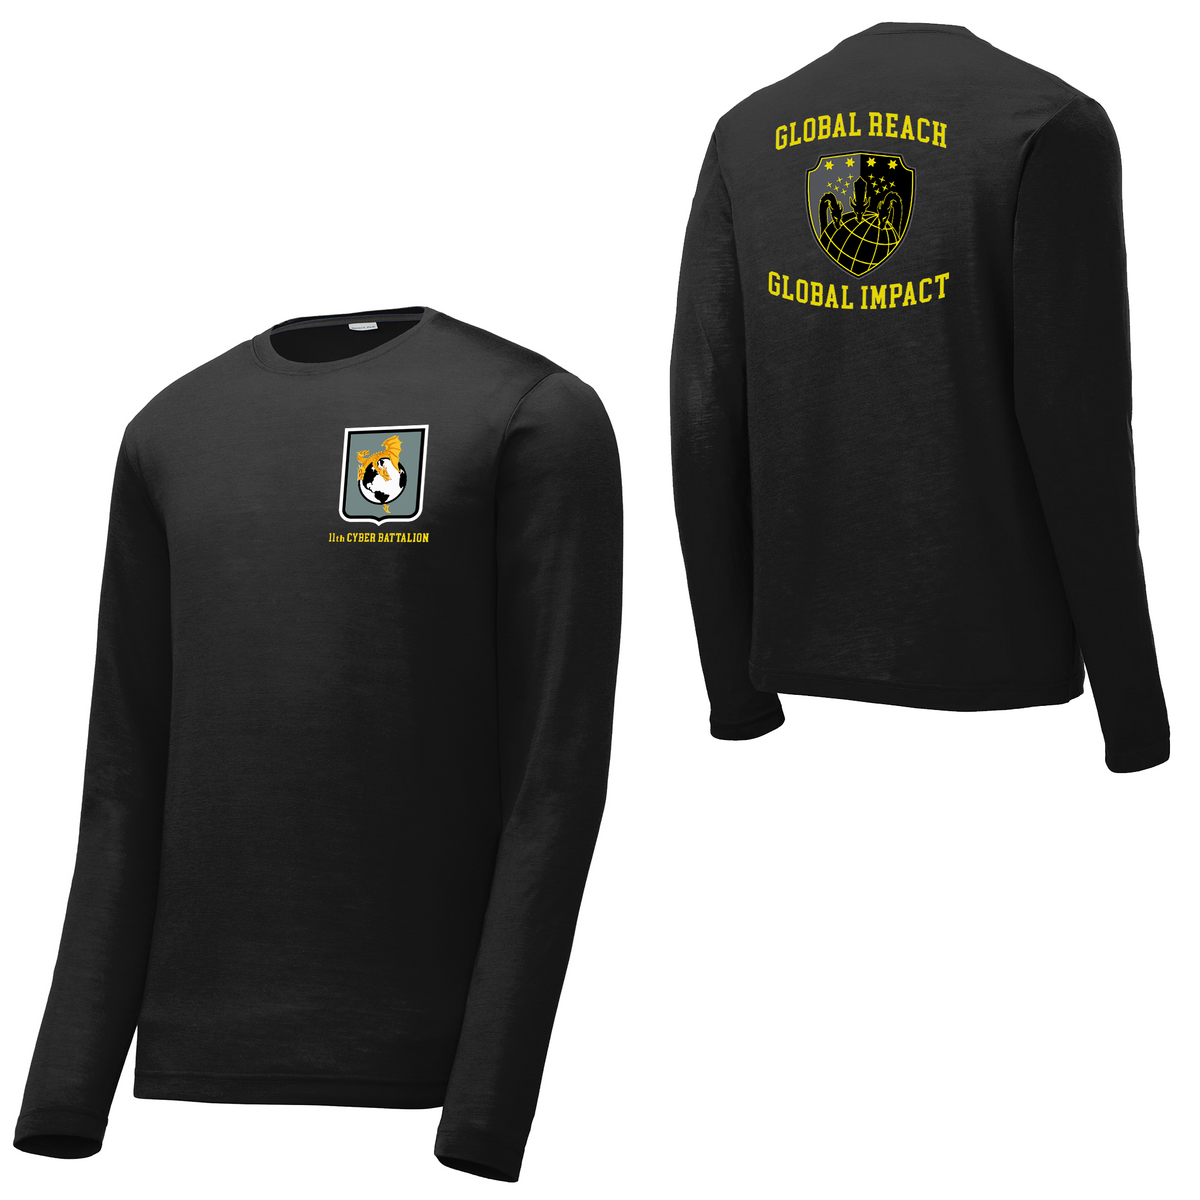 11th Cyber Battalion Long Sleeve CottonTouch Performance Shirt - AUTHORIZED FOR PRT WEAR